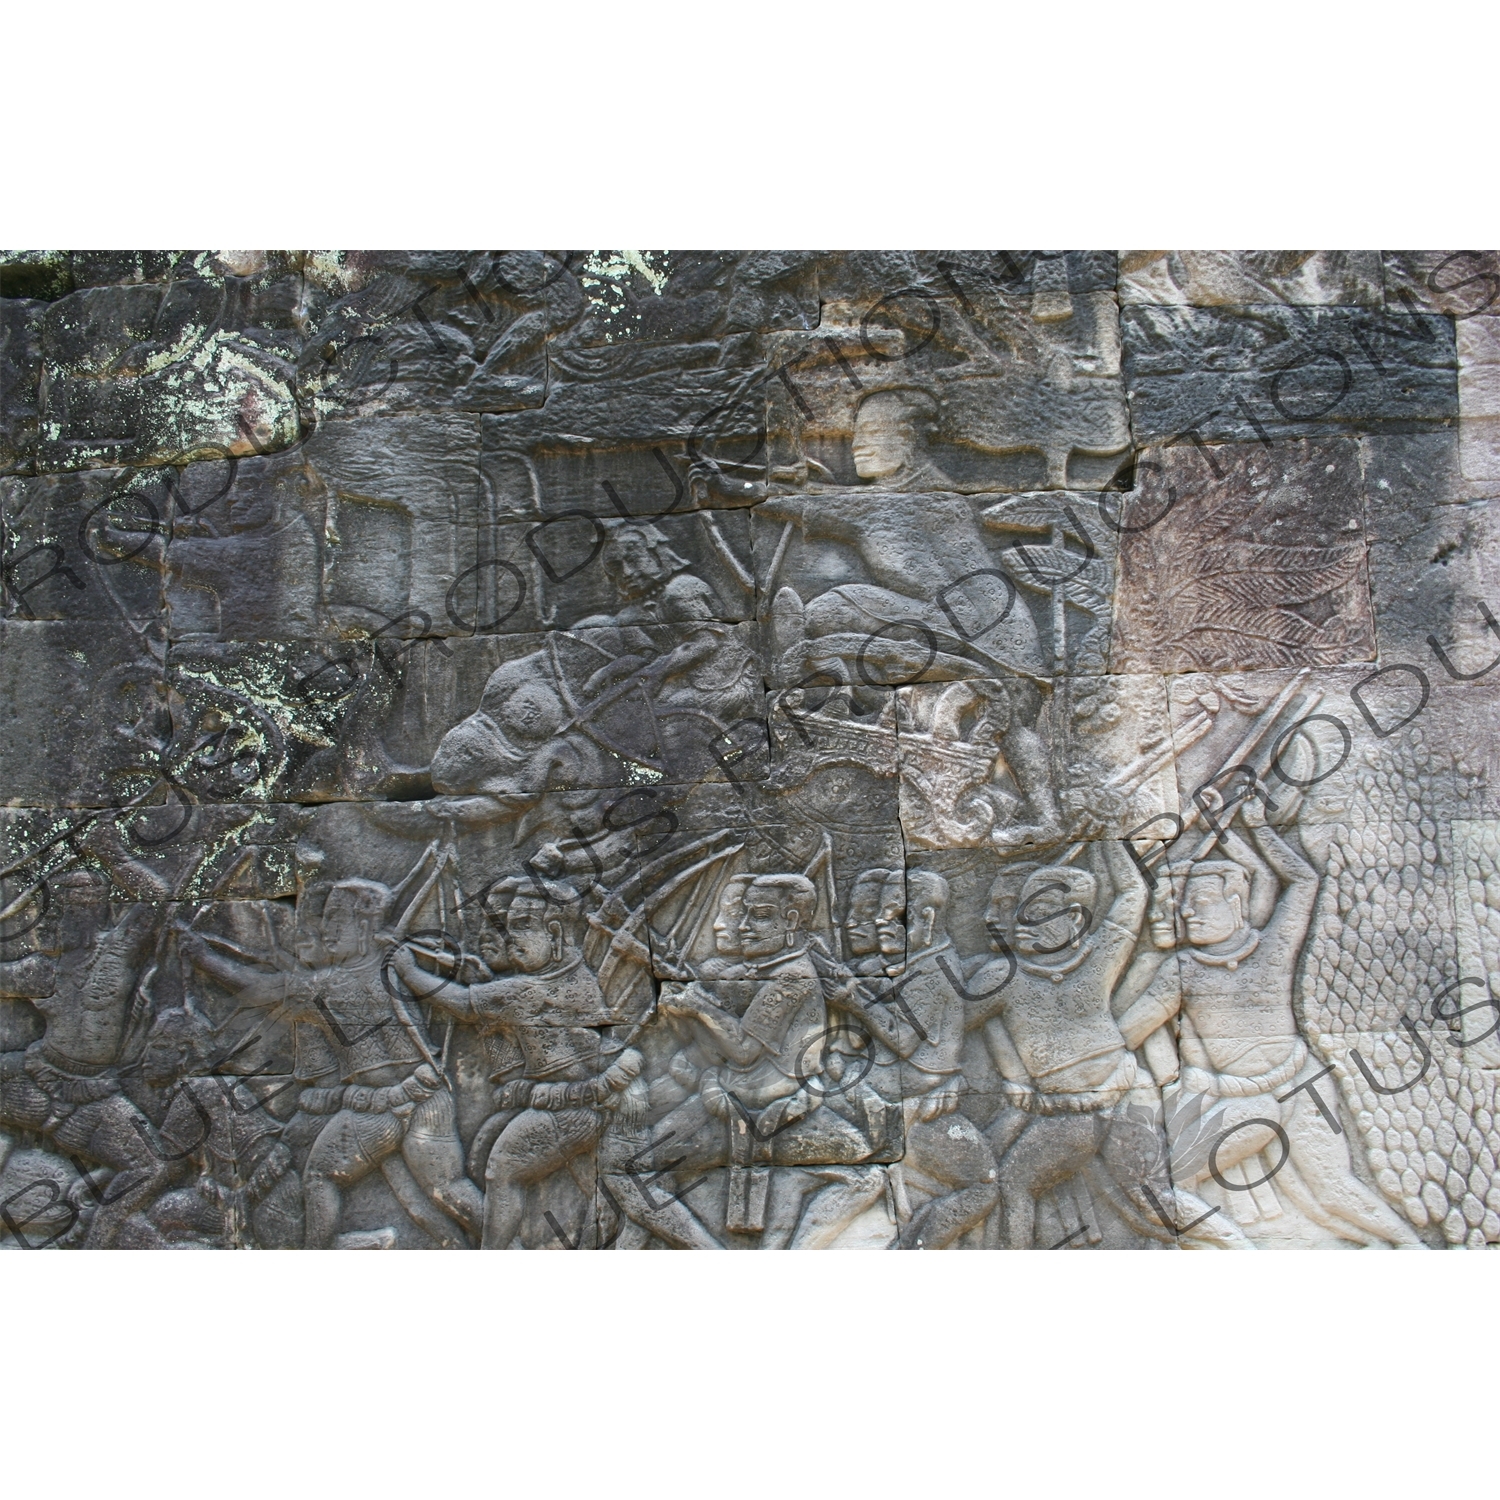 Sculptural Relief in Angkor Thom